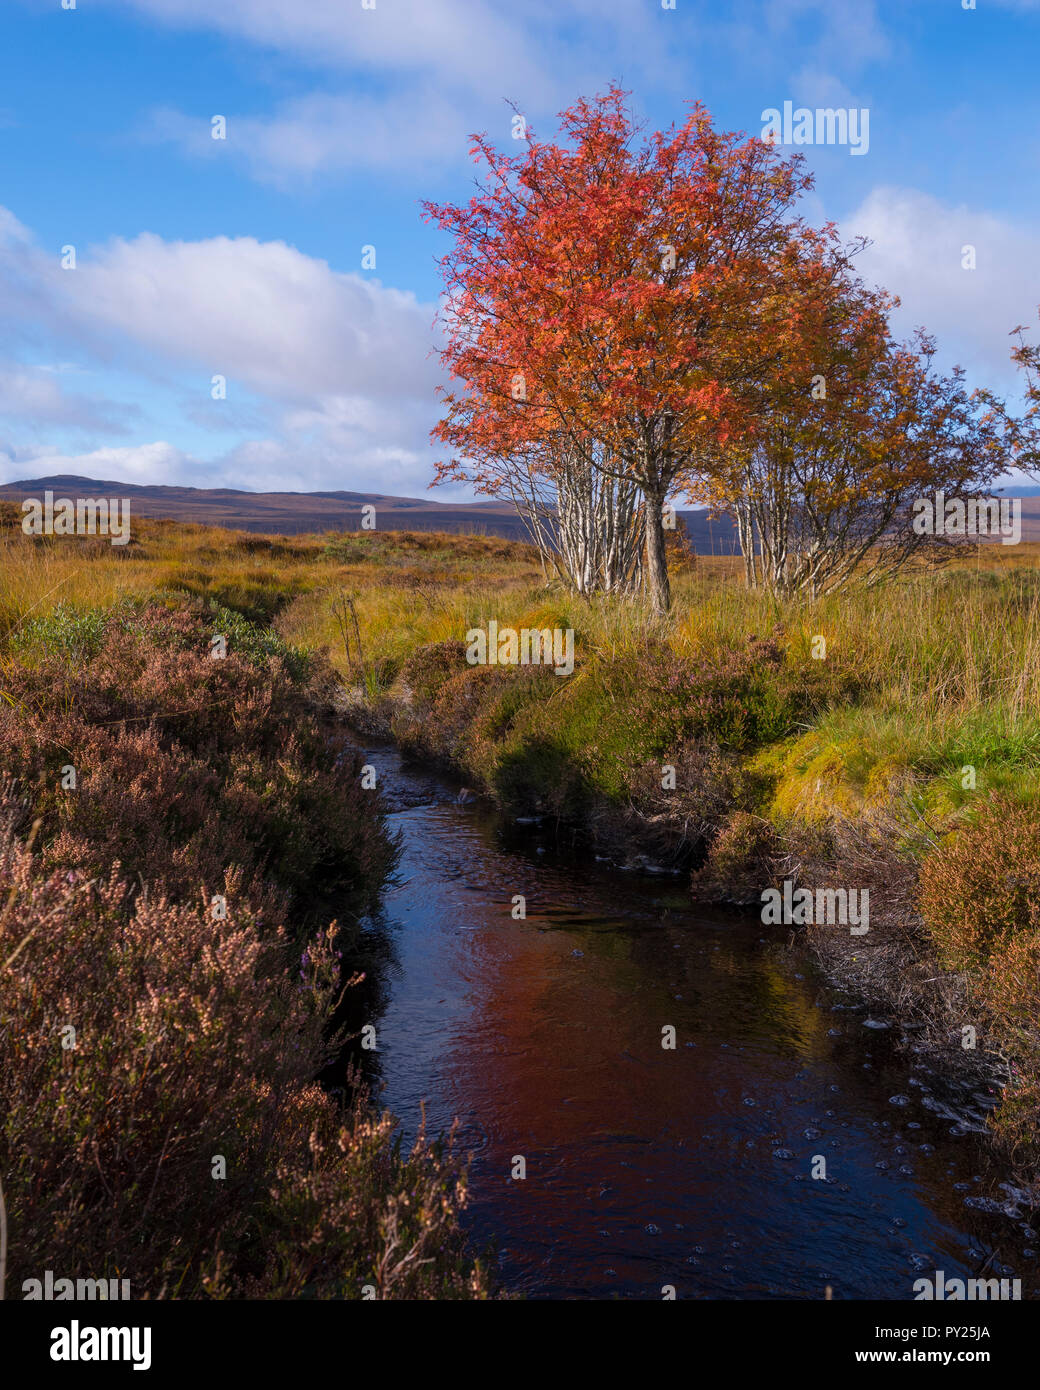 Scottish Ash tree with red leaves in the Sutherland, Highland, Scotland Stock Photo